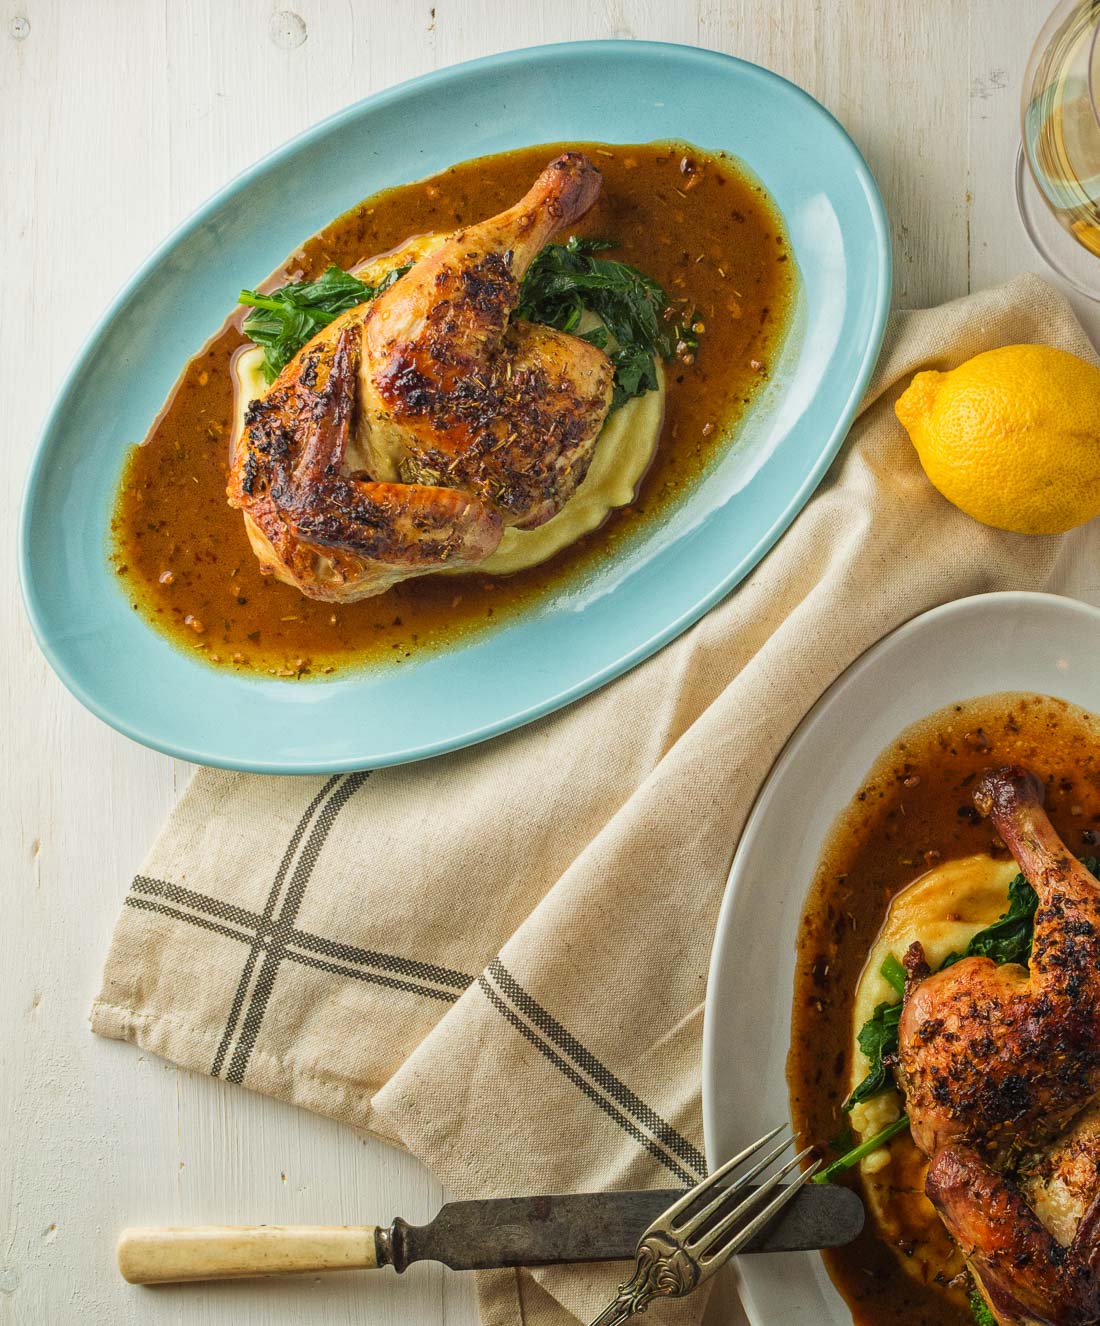 This chicken diavolo is garlicky, lemony and big on herbs. If that sounds good maybe this is the chicken diavolo for you.